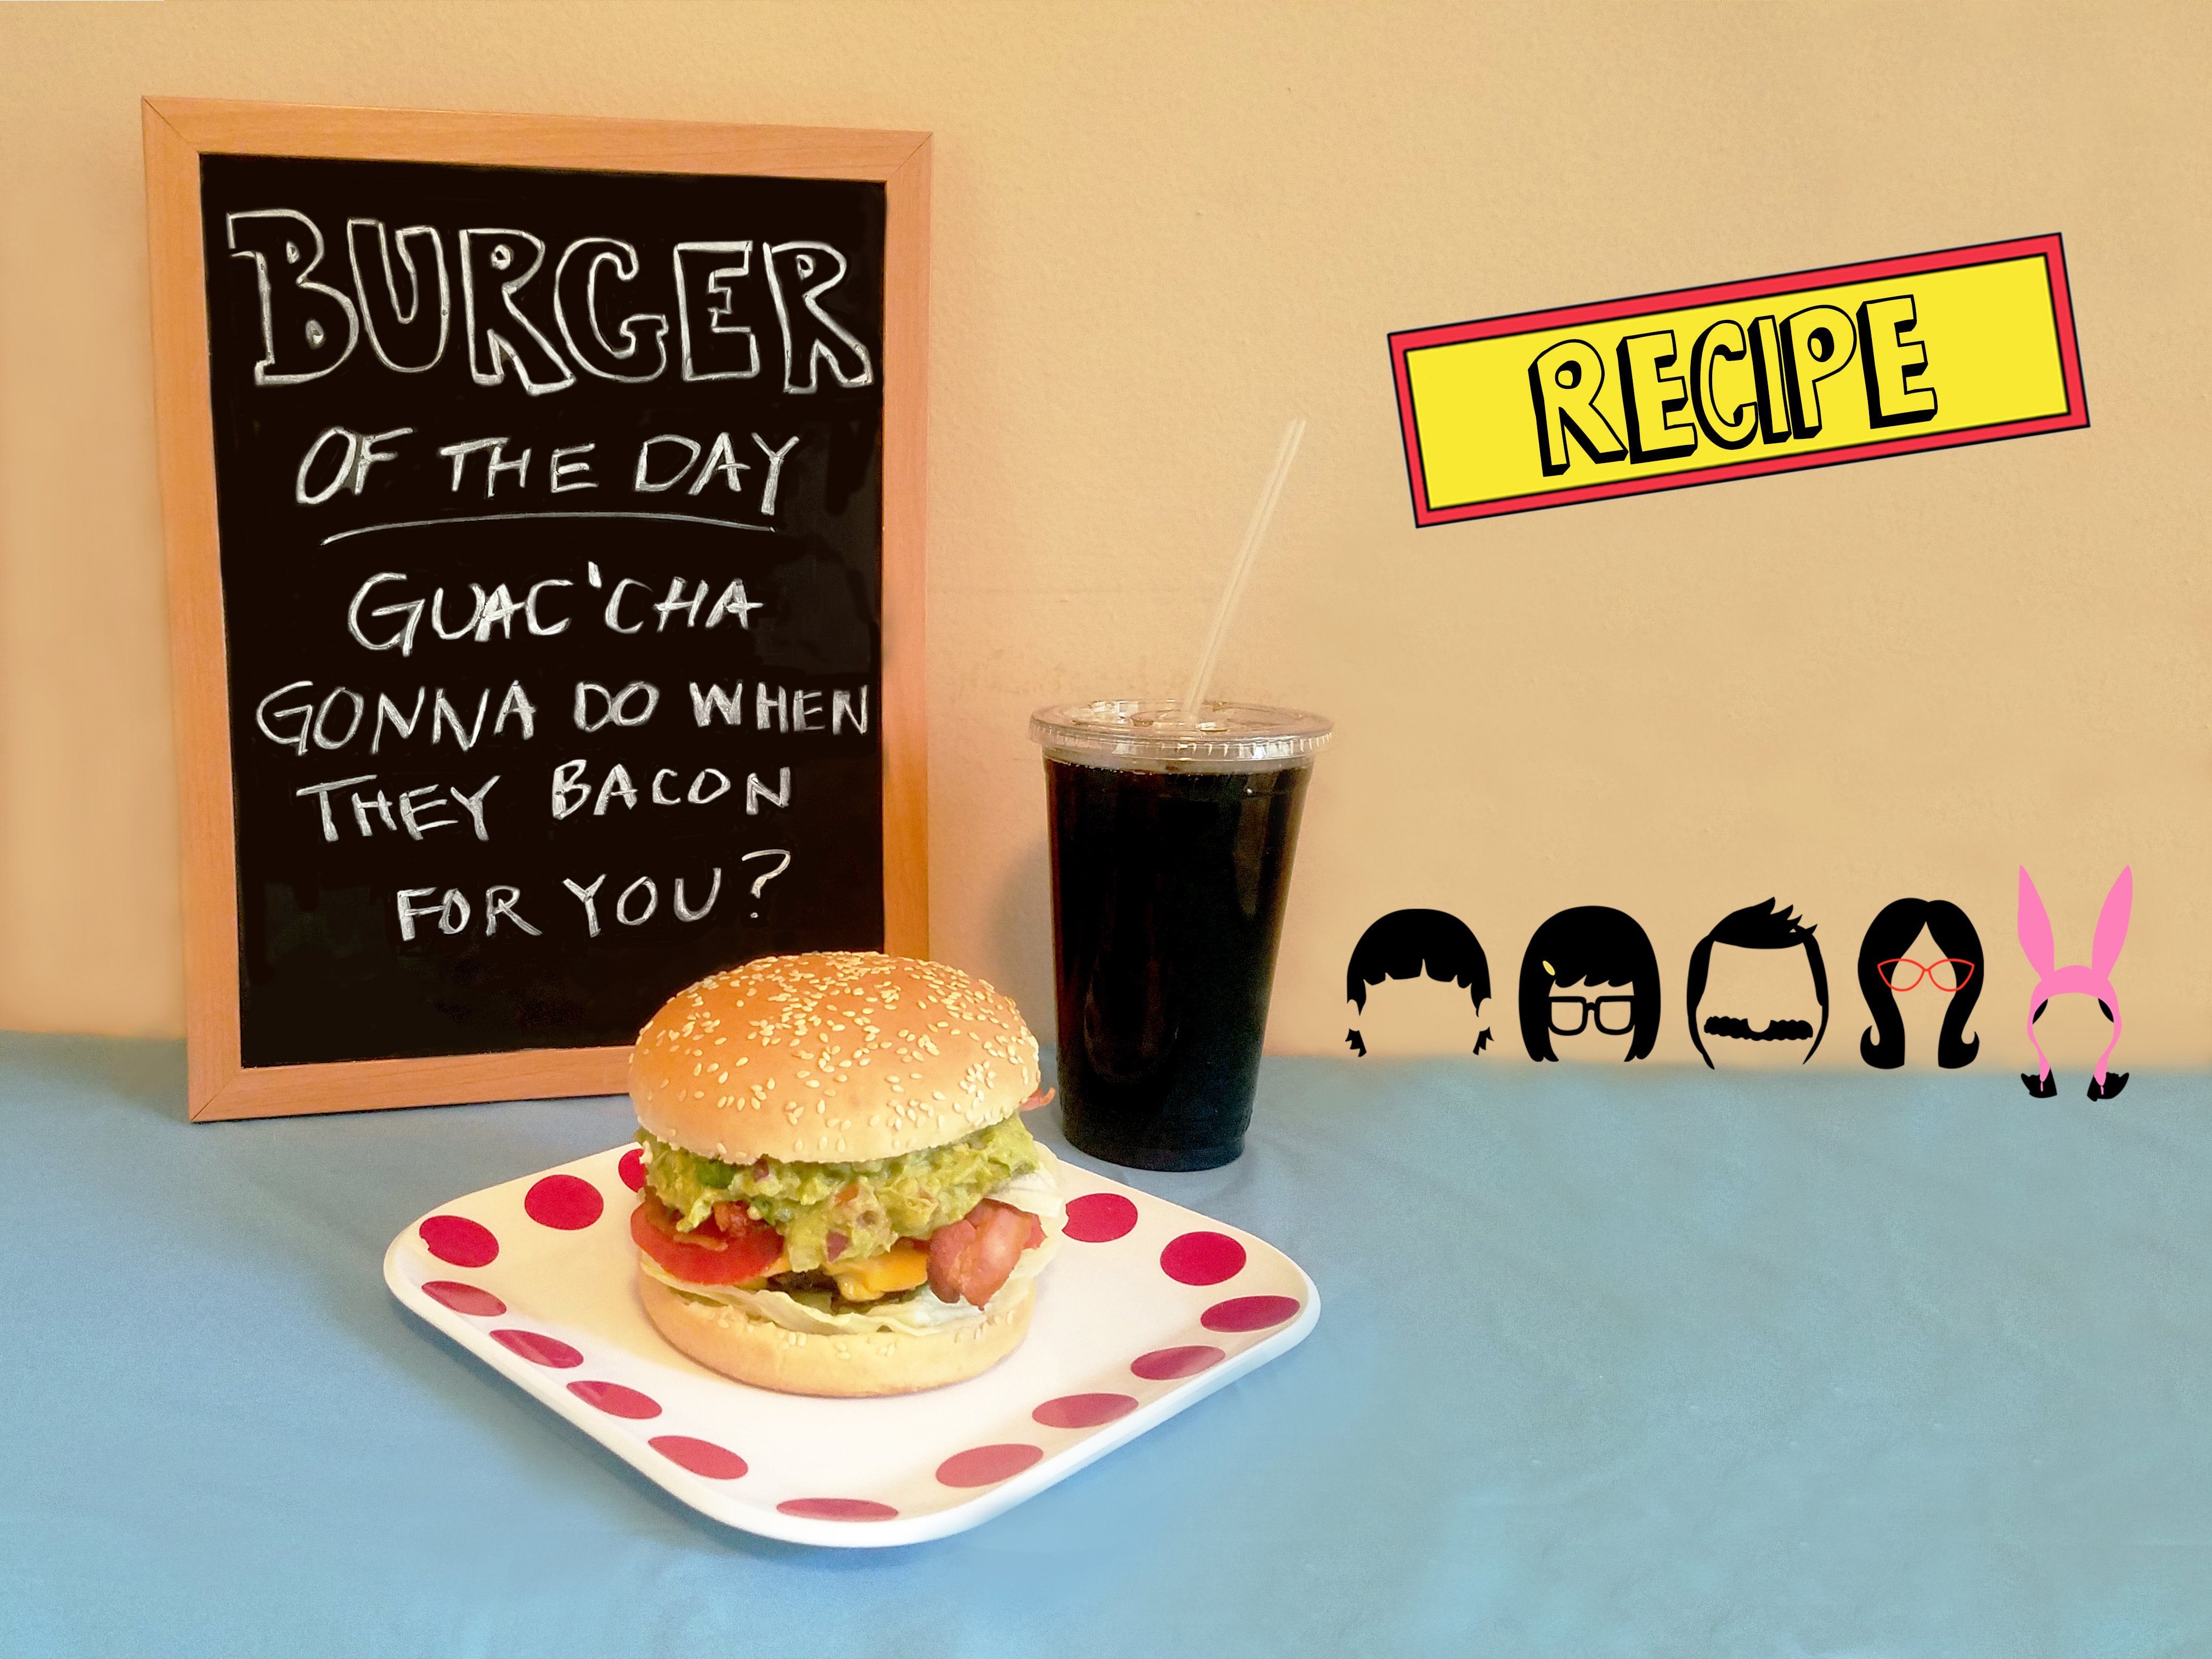 The Daily Crate | Burger Of the Month!: 'Guac'cha Gonna Do When They Bacon for You'